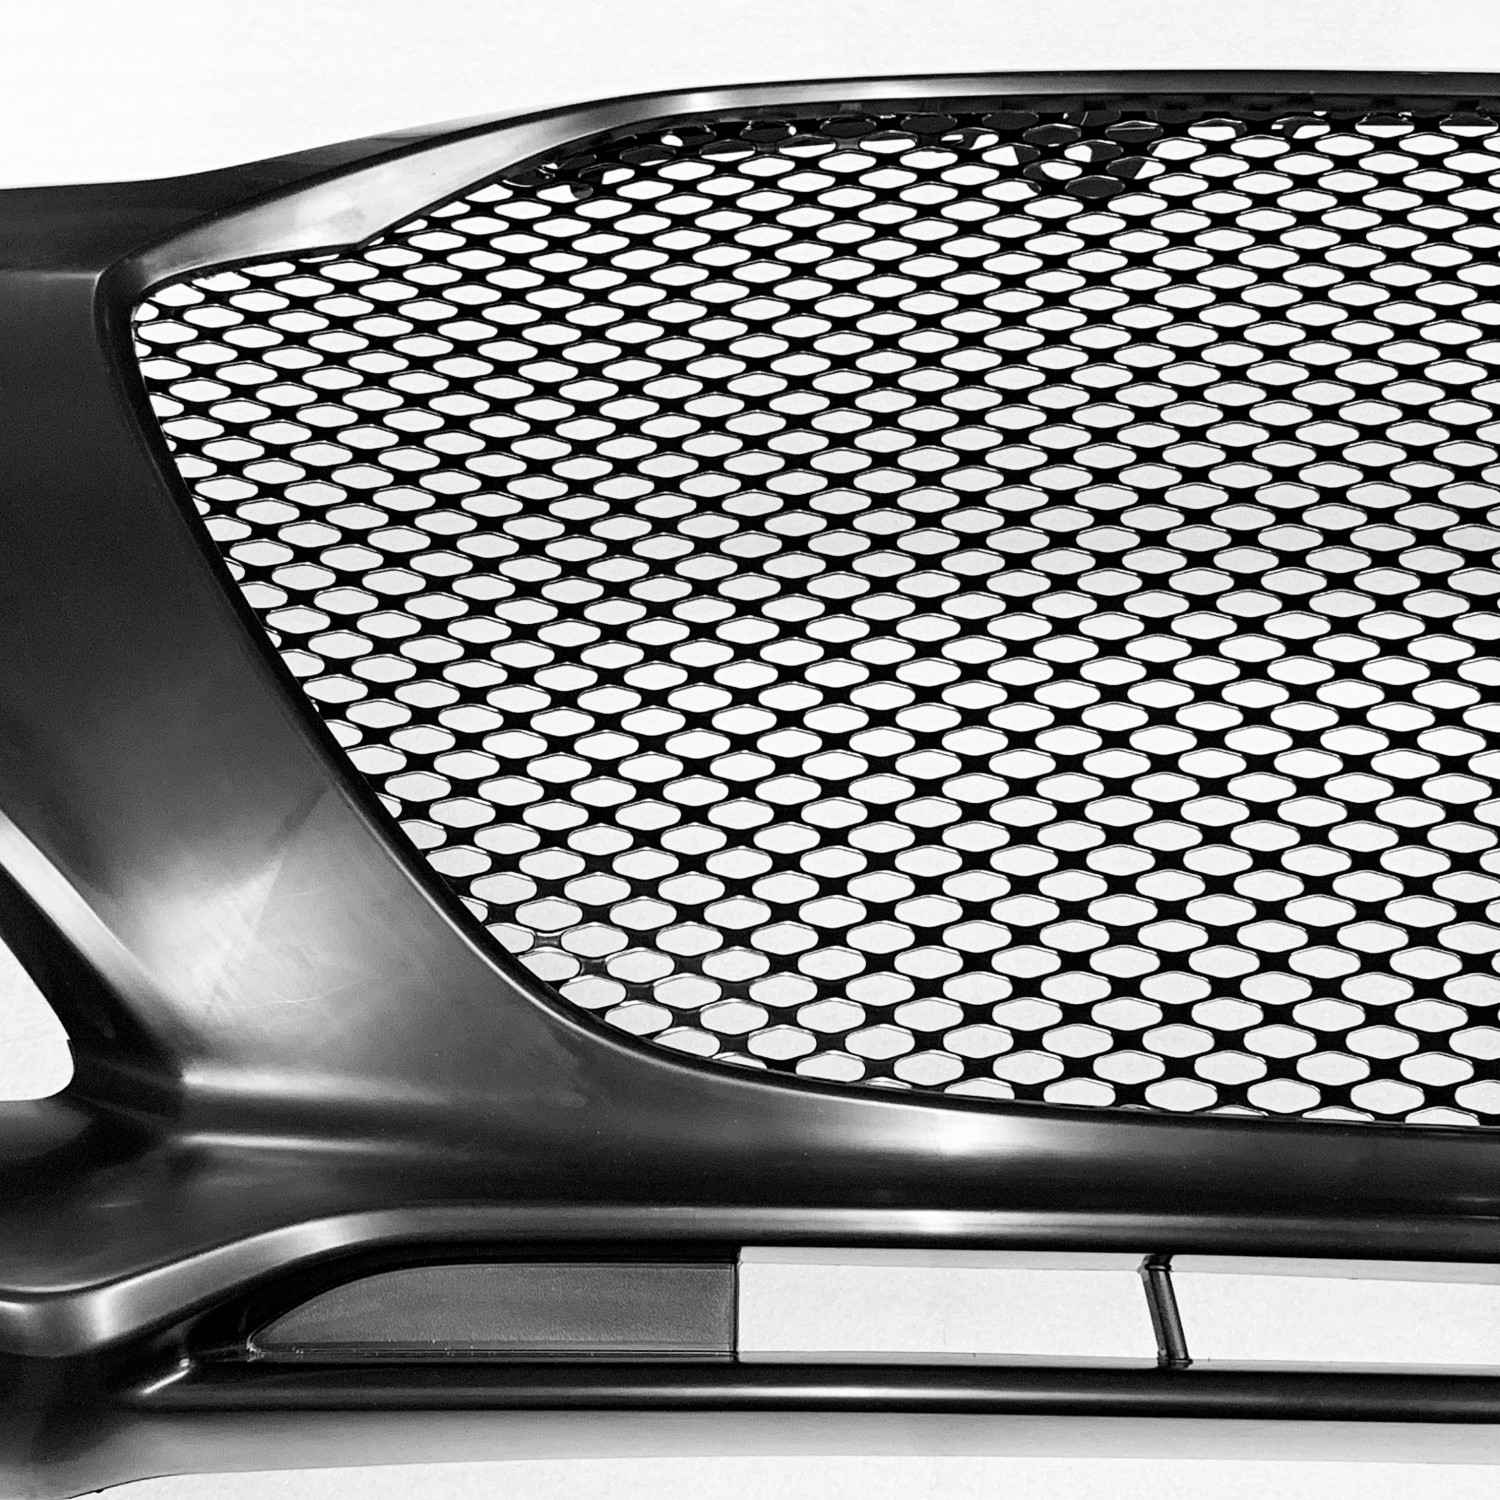 Get Ready for Something New: Preview of Grille Mesh Product for Hyundai Genesis